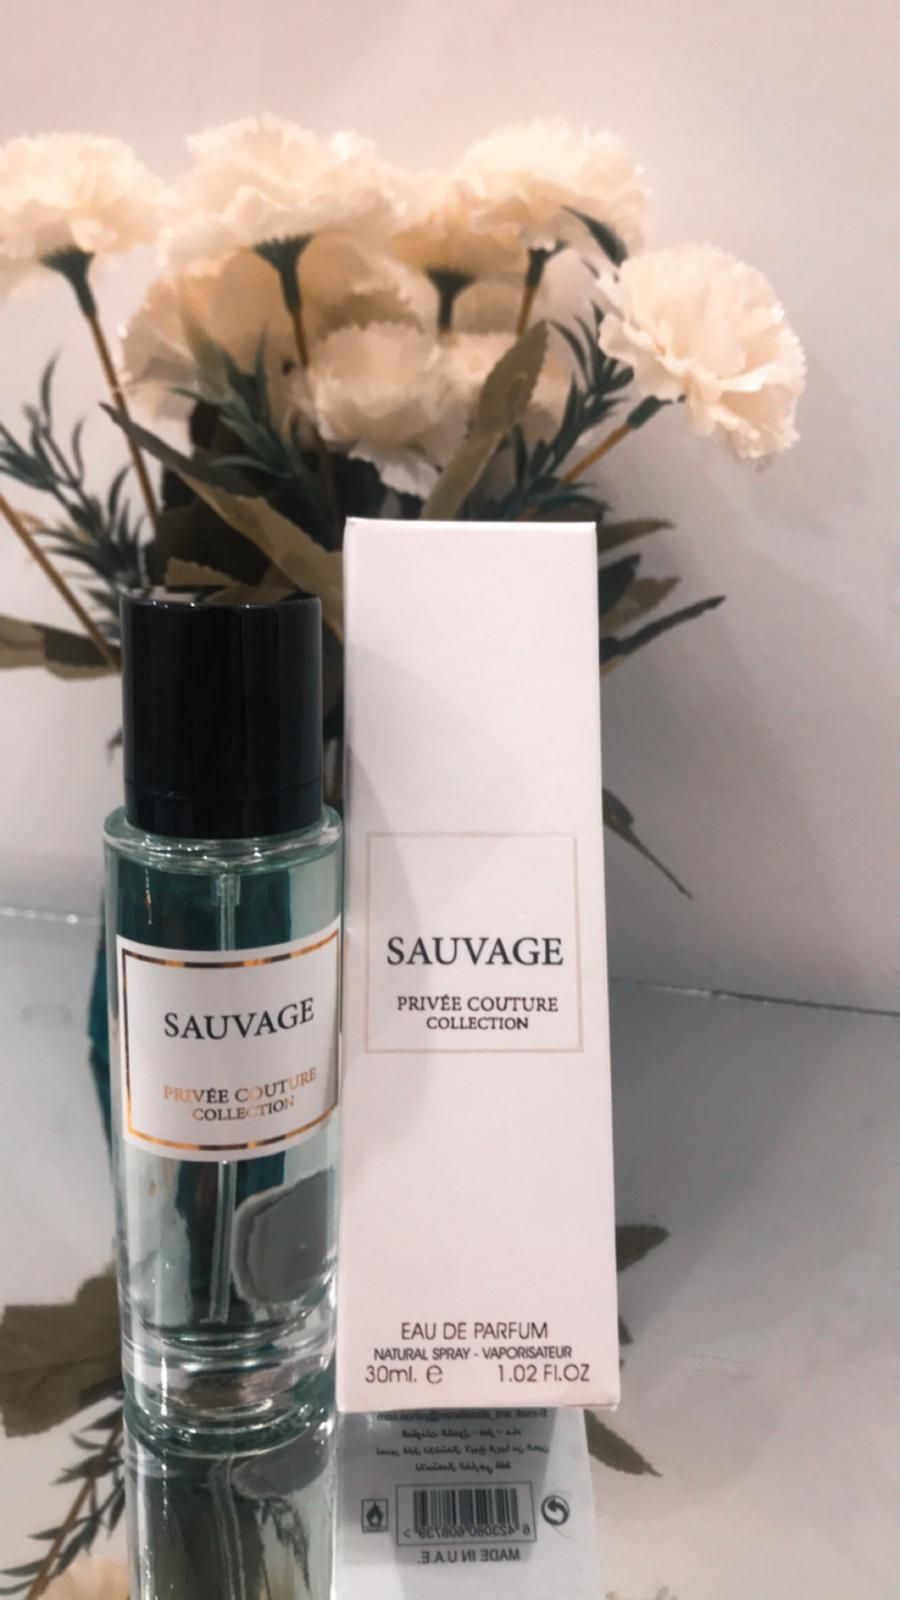 Sauvage by Privee Couture Collection The quality of this perfume